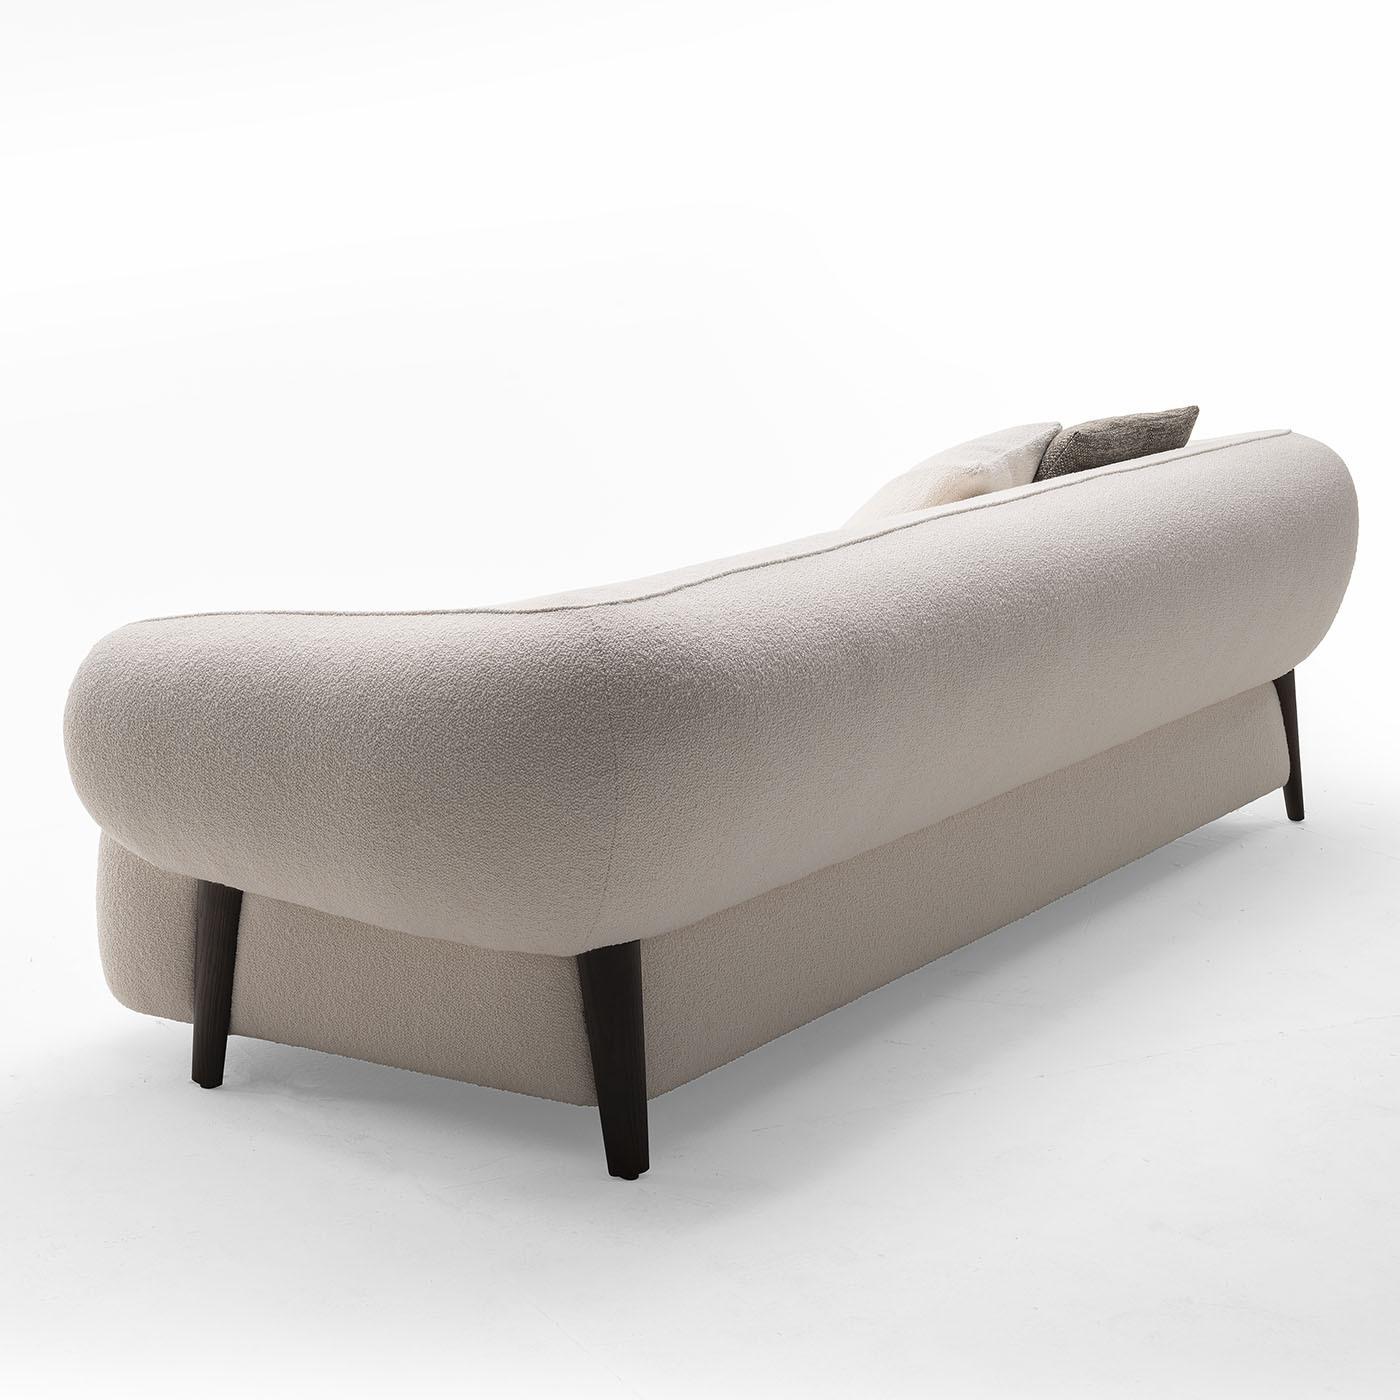 As bold as it is minimalist, this three-seater sofa promises moments of impeccable comfort spent against its plump and enveloping volumes. The rich padding - characterizing both the seat and the backrest with slightly sloped armrests - comes sealed